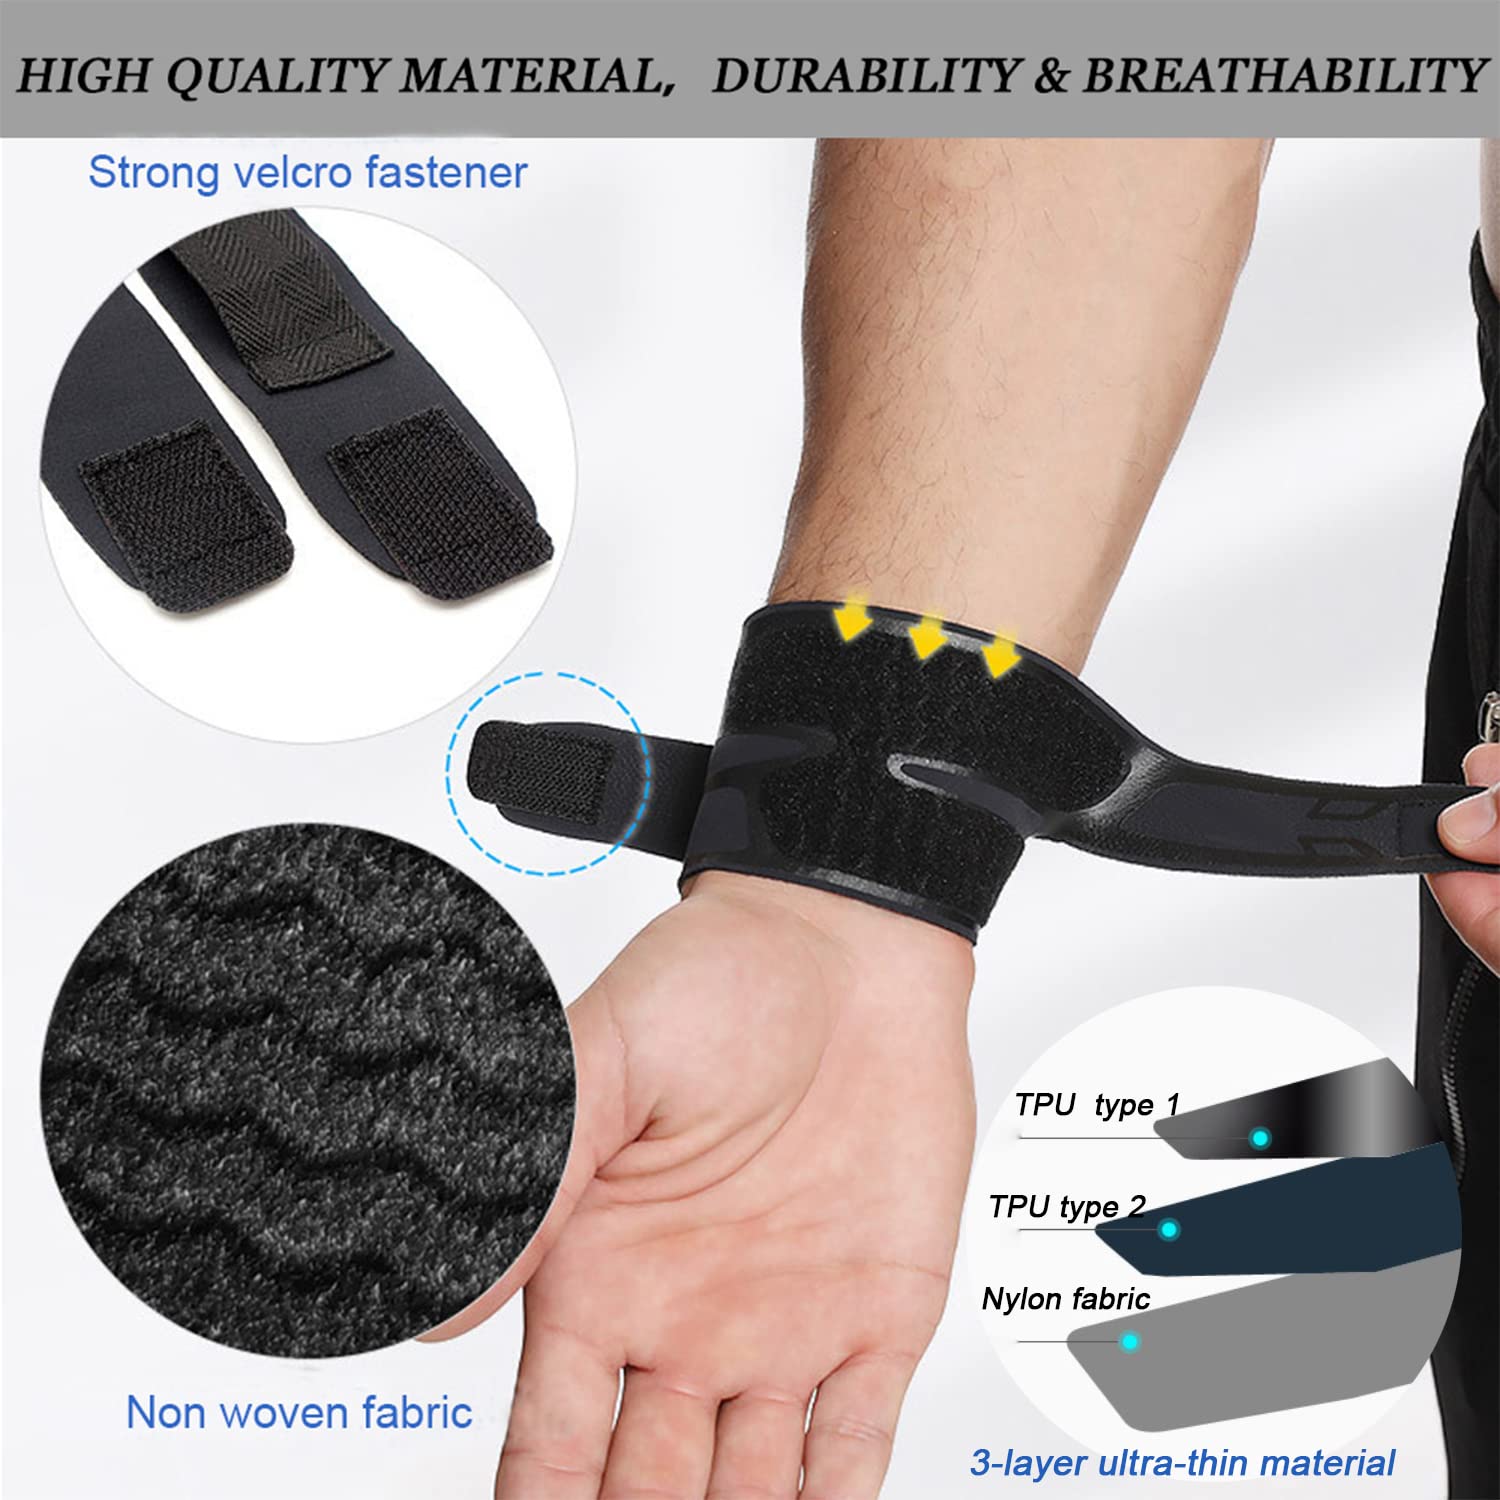 Mezeic Wrist Brace for Carpal Tunnel, Adjustable Ultra Thin Compression Wrist Wraps Wrist Support for Tendonitis and Arthritis Wrist Strap Pain Relief for Men Women, Working Out, Weightlifting - Black